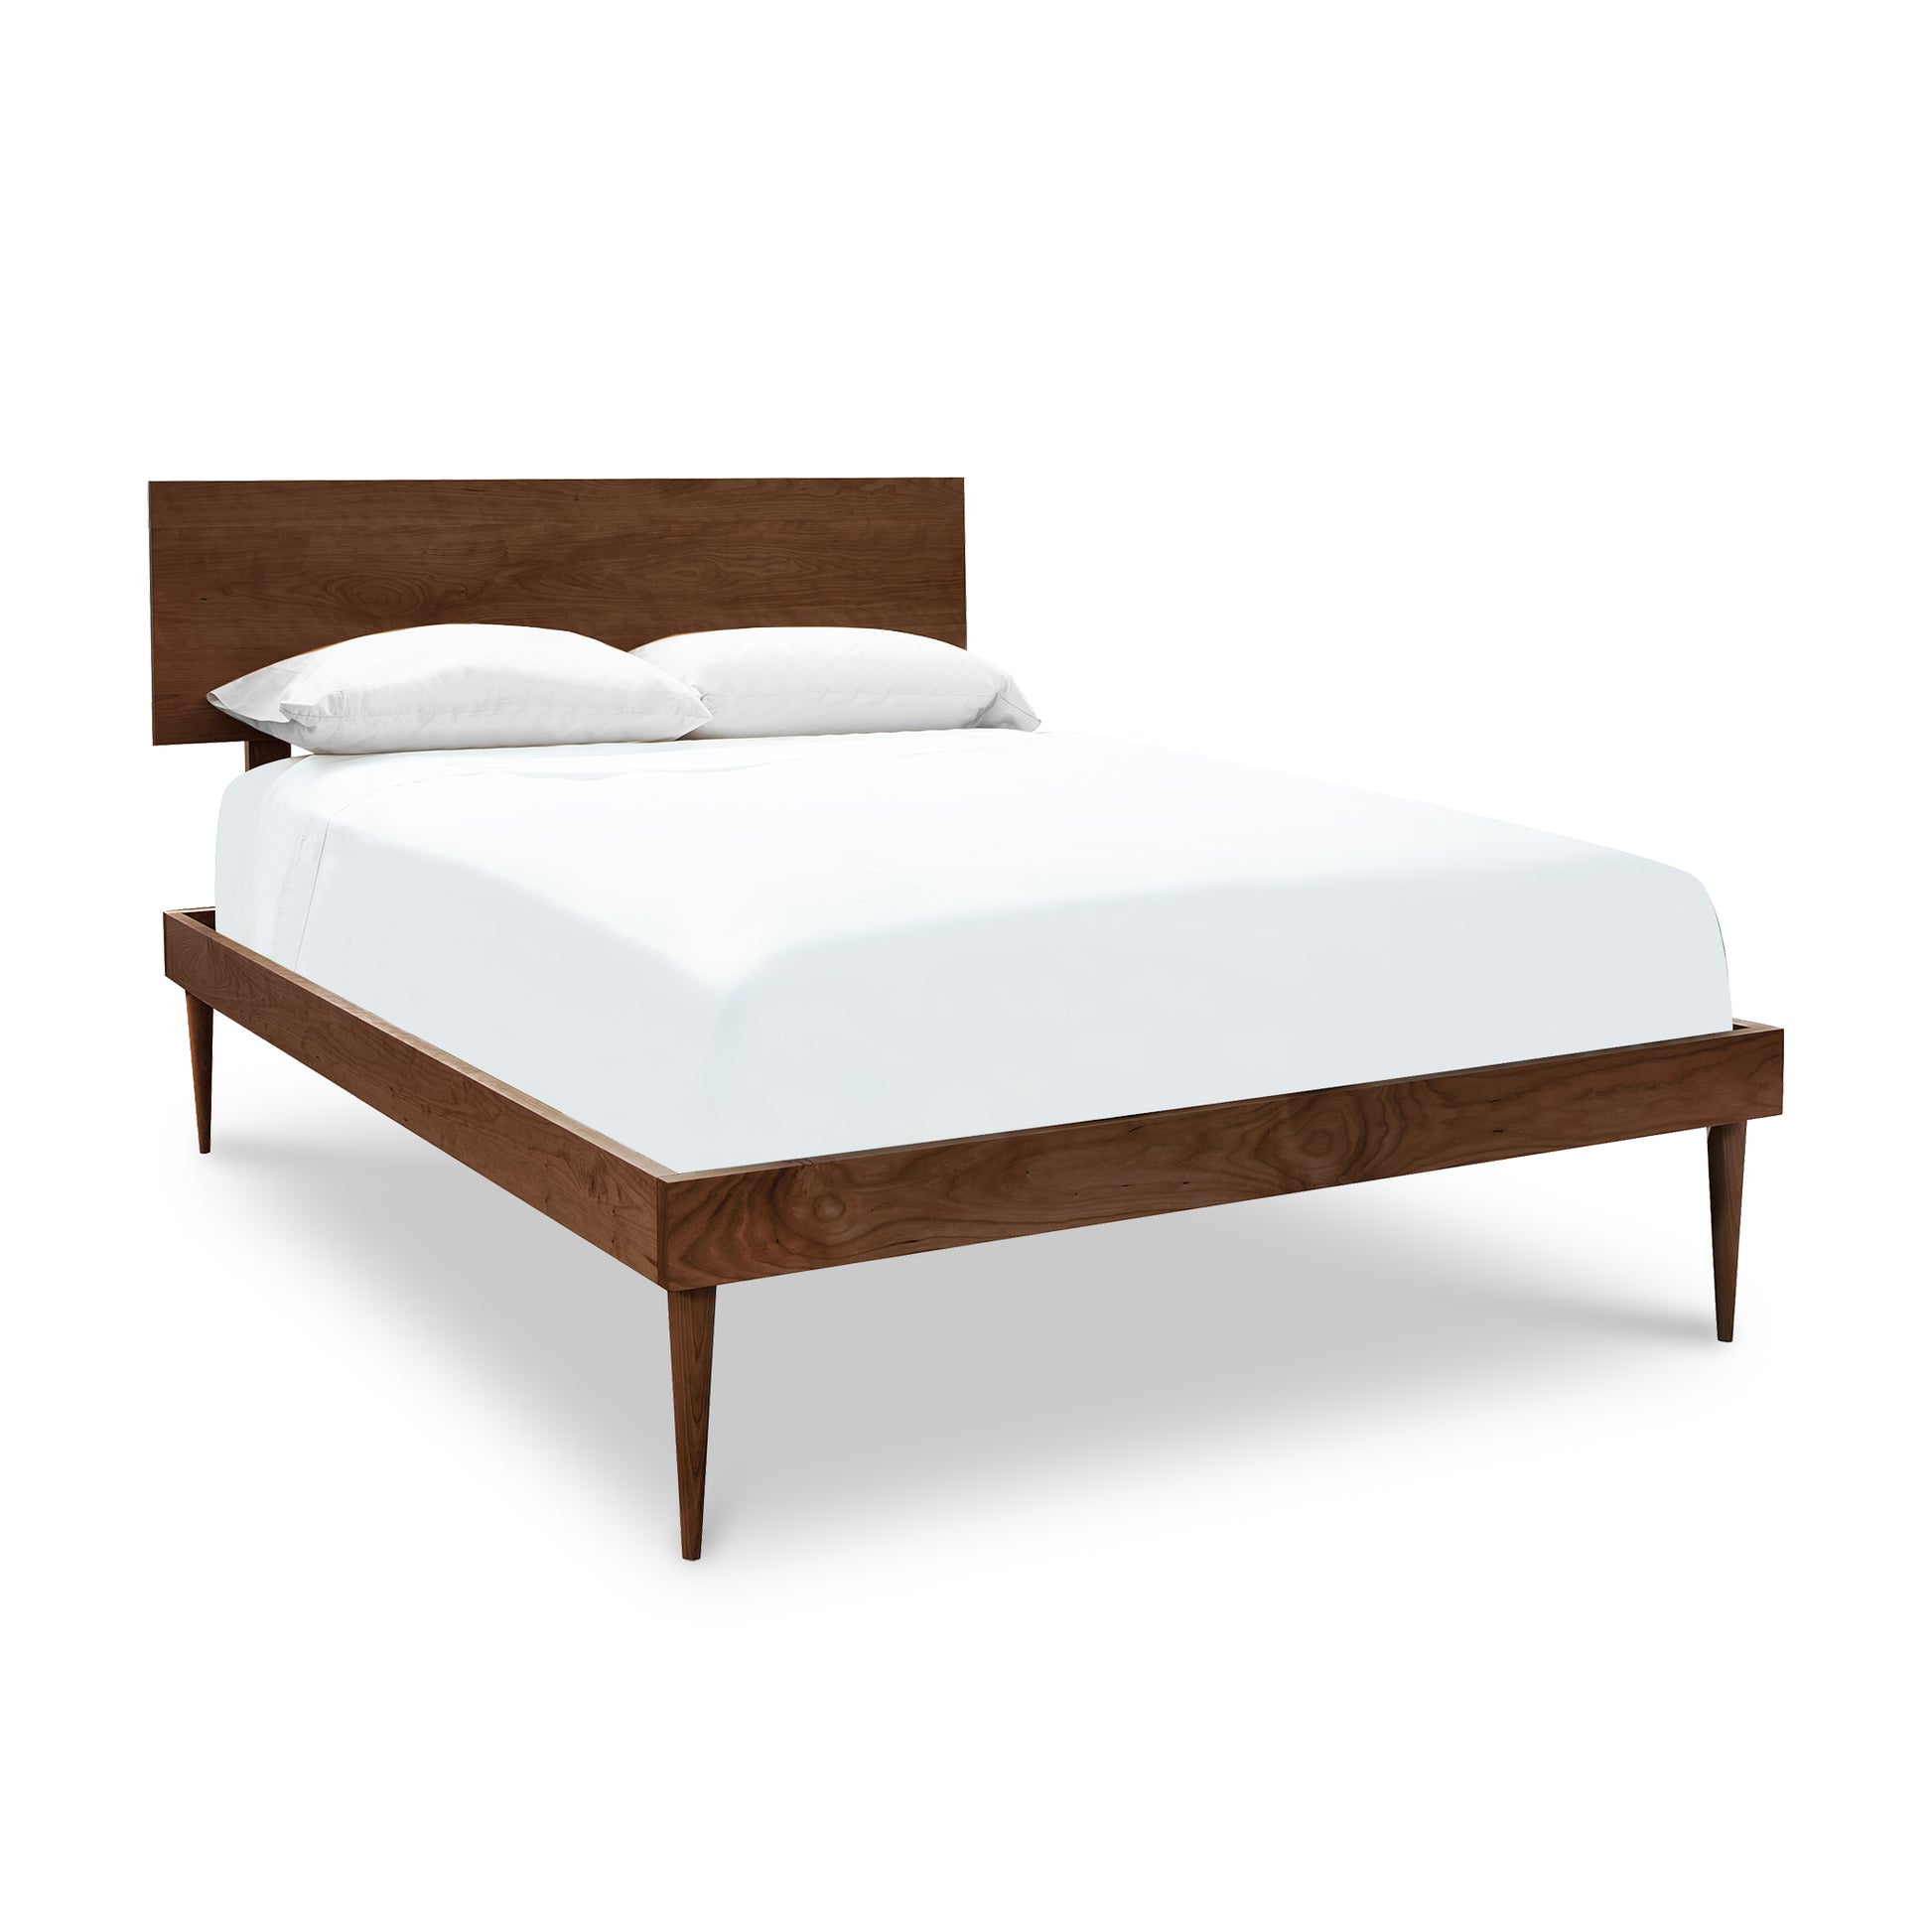 A Larssen Bed platform bed frame made of natural cherry wood with a Vermont Furniture Designs white mattress and pillows isolated on a white background.